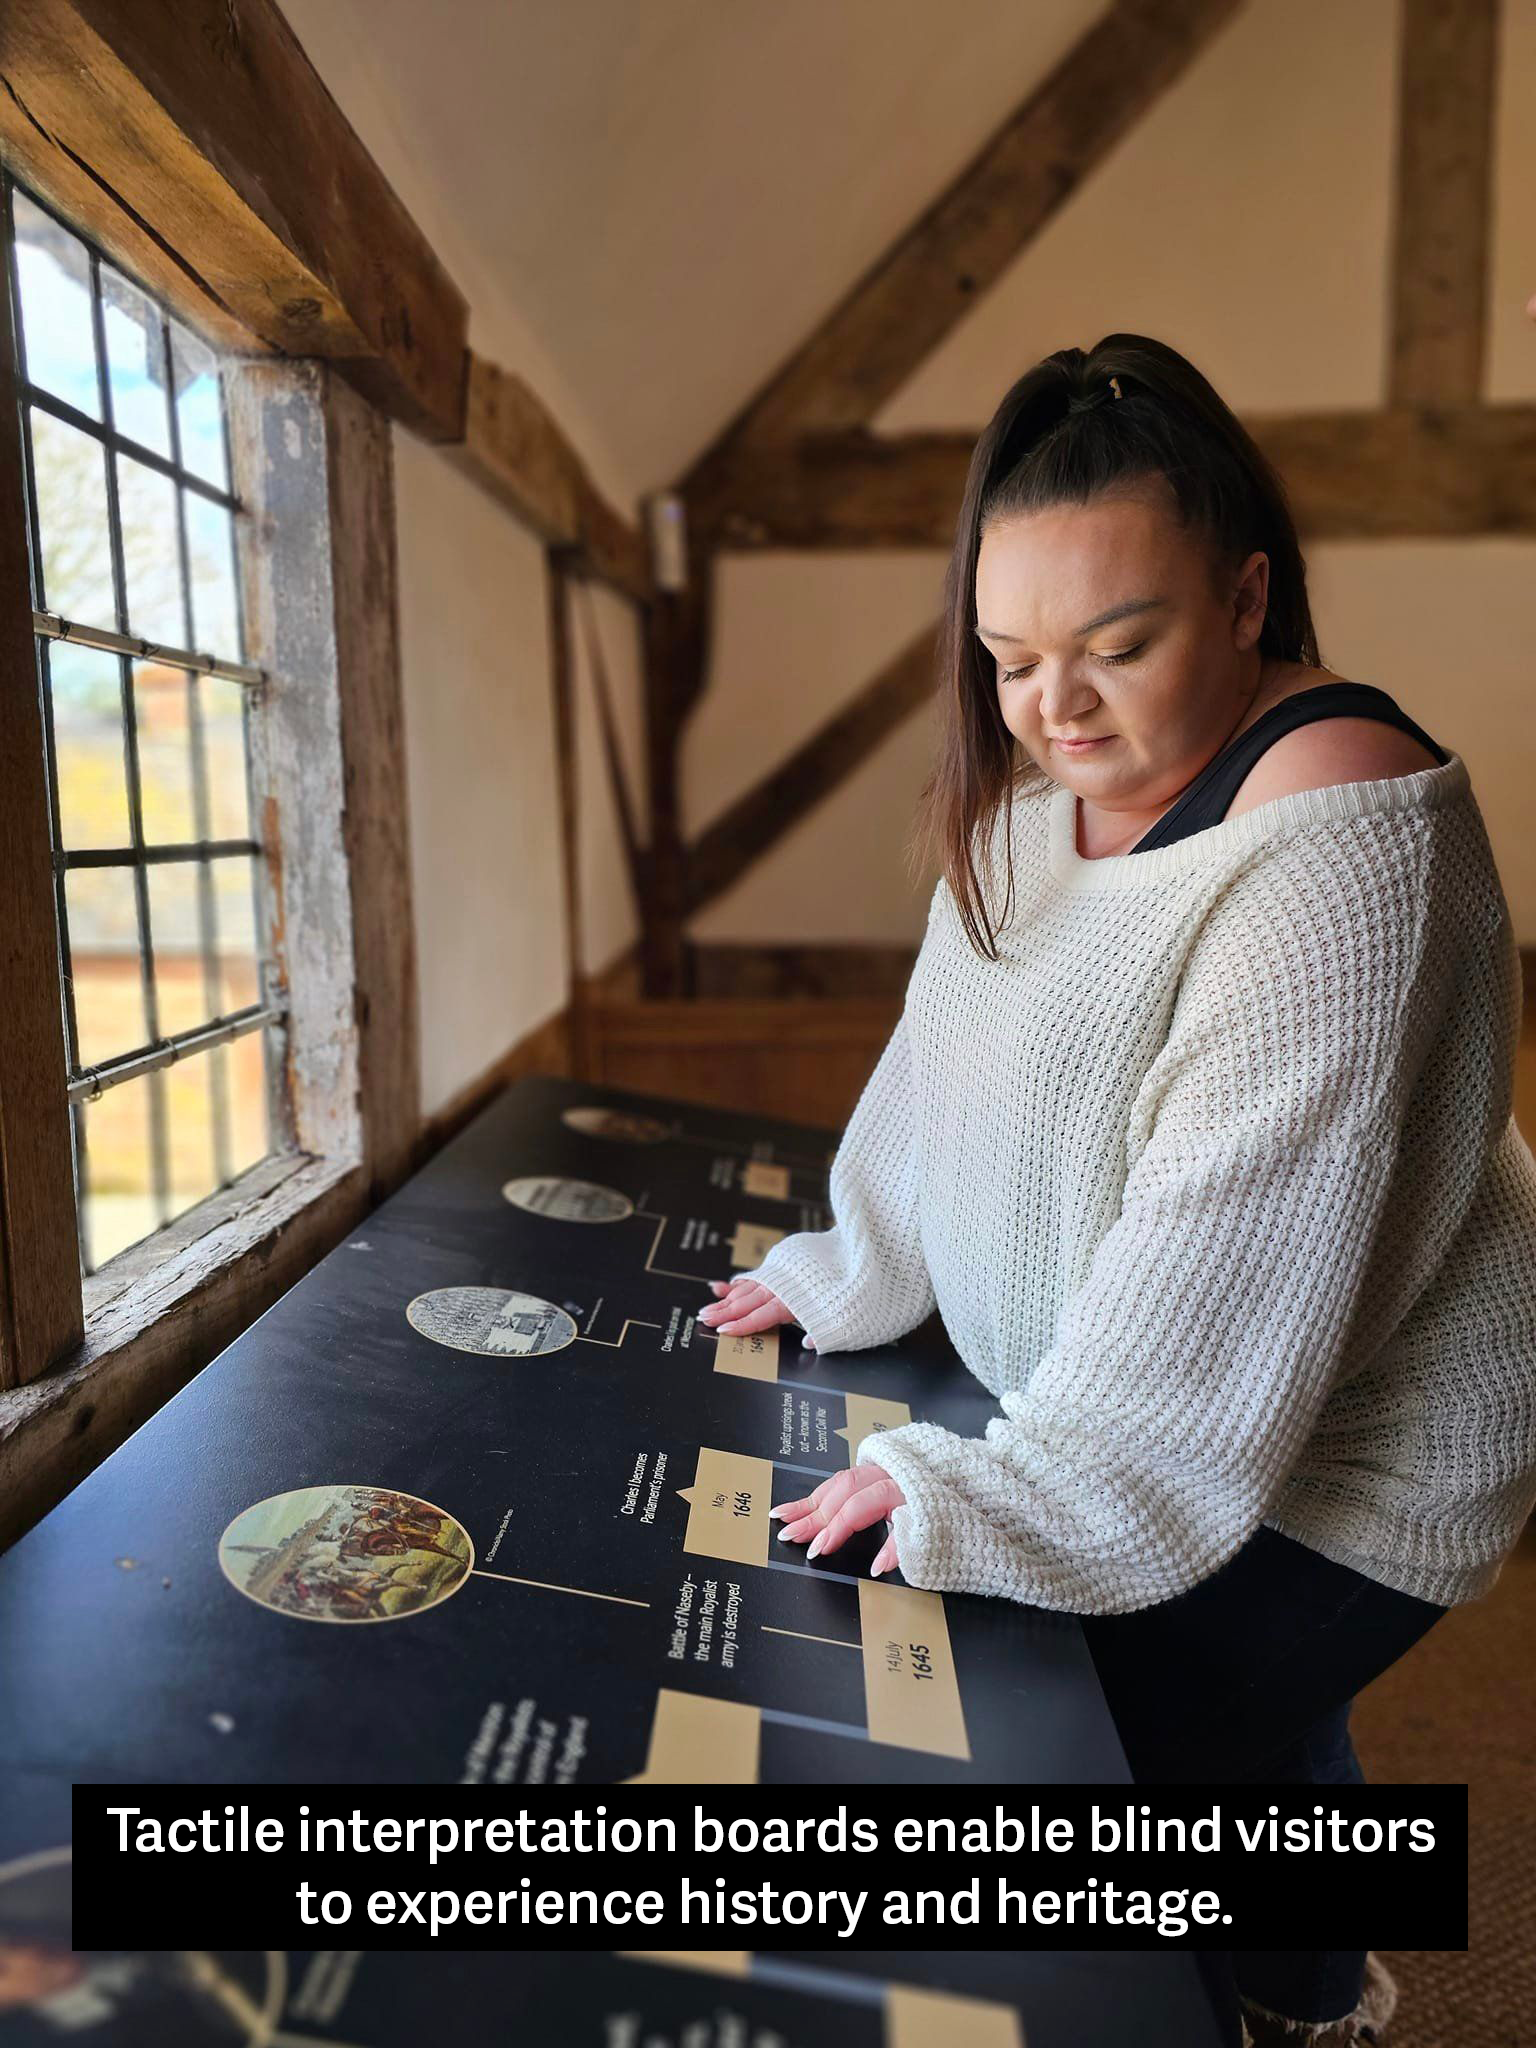 Image depicts a person using their hands to feel along an interpretation board which is situated in front of an old-looking window with light coming into the historic space.